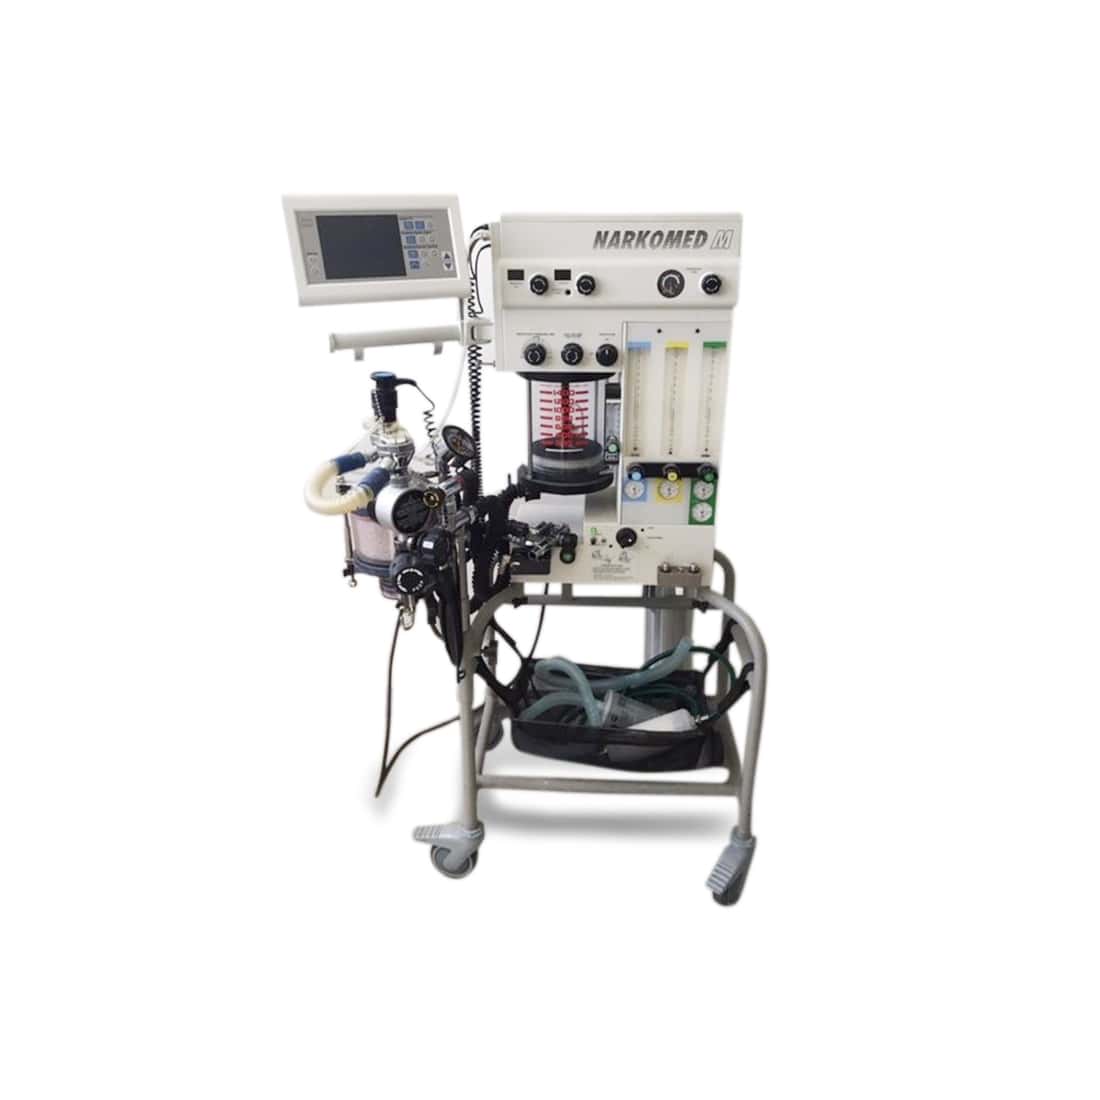 Drager Narkomed M Anesthesia Machine